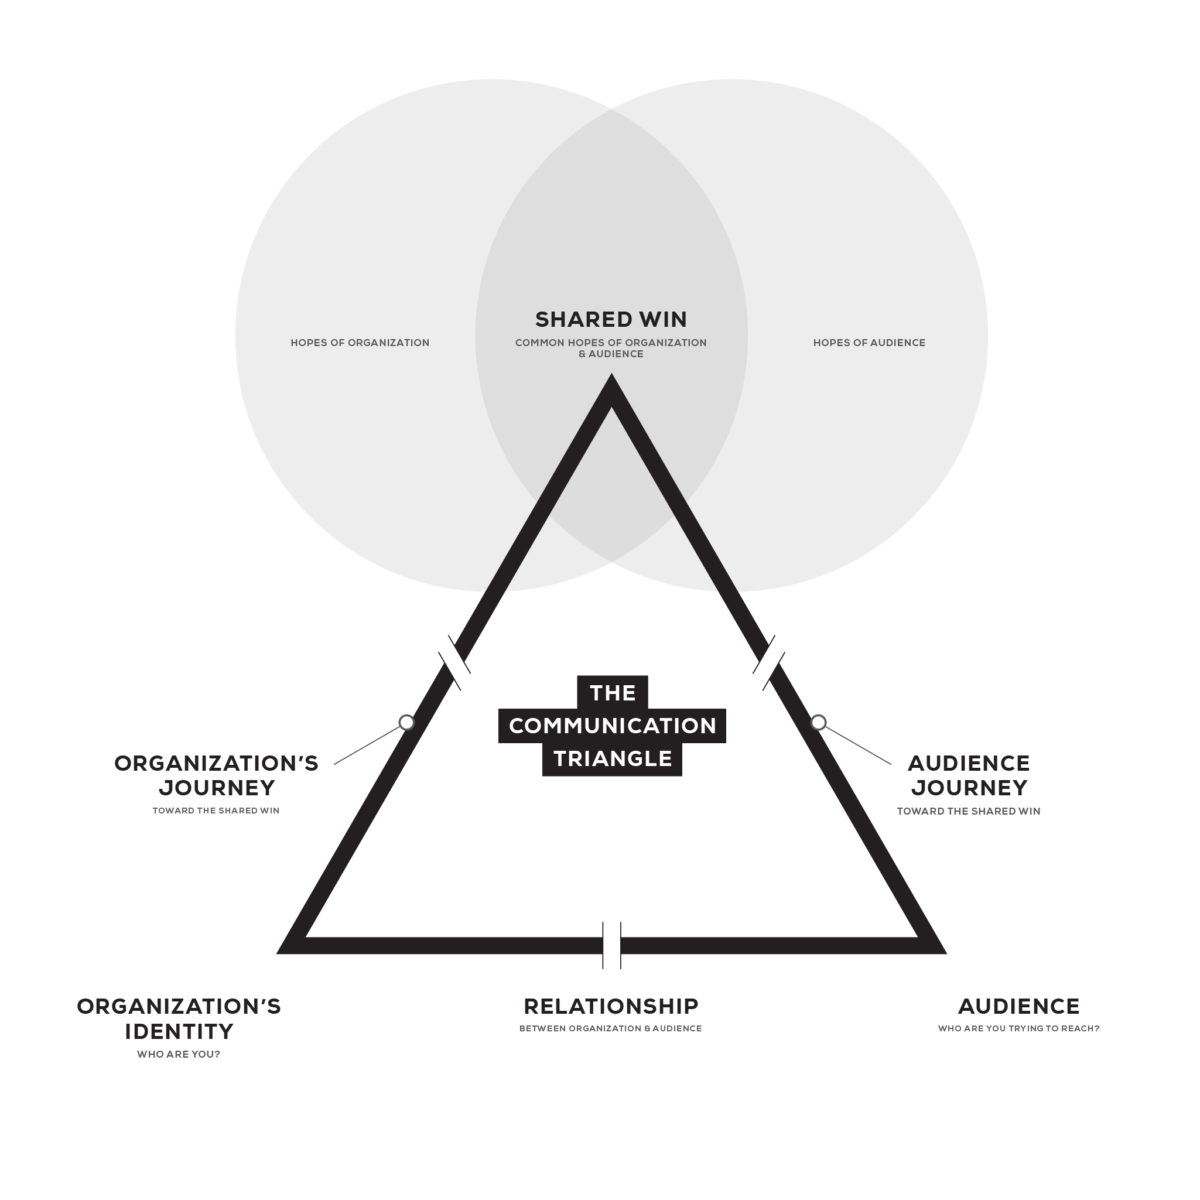 The Communication Triangle